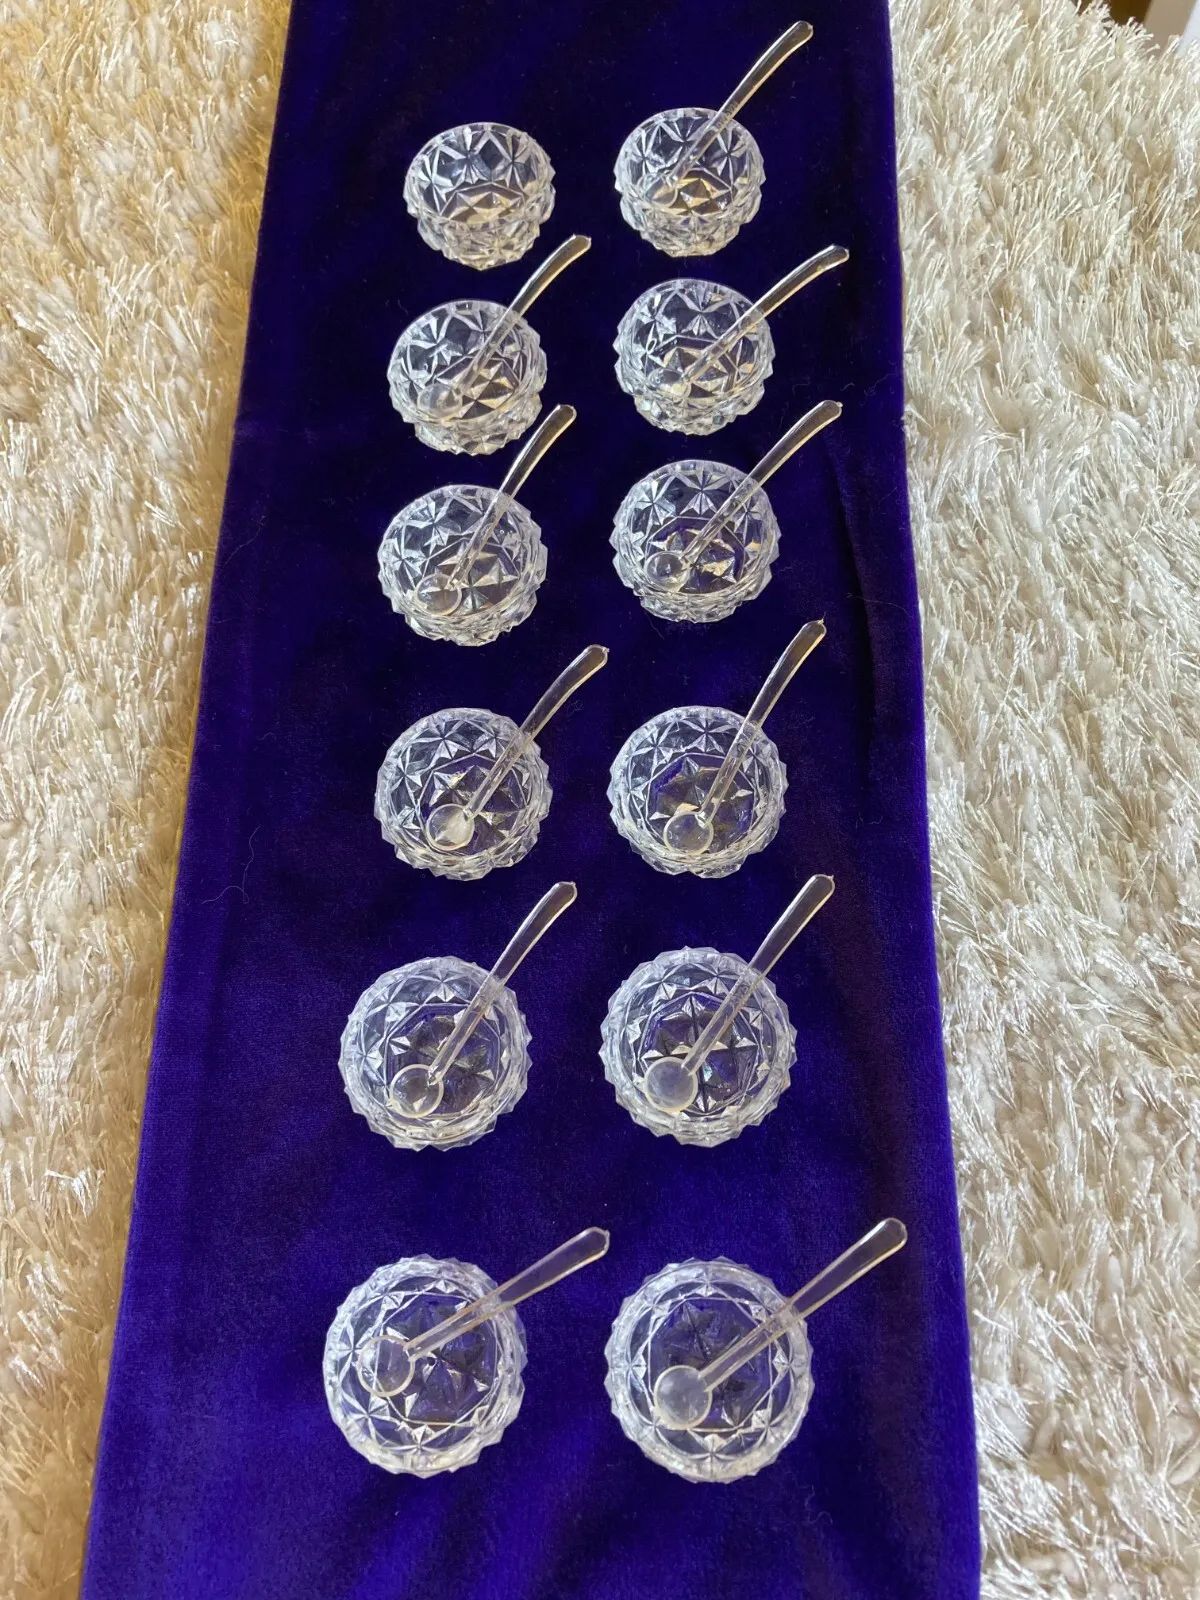 12 Clear Glass Open Salt Cellars with 12 Plastic Spoons  In Boxes Made in Japan  | eBay | eBay US